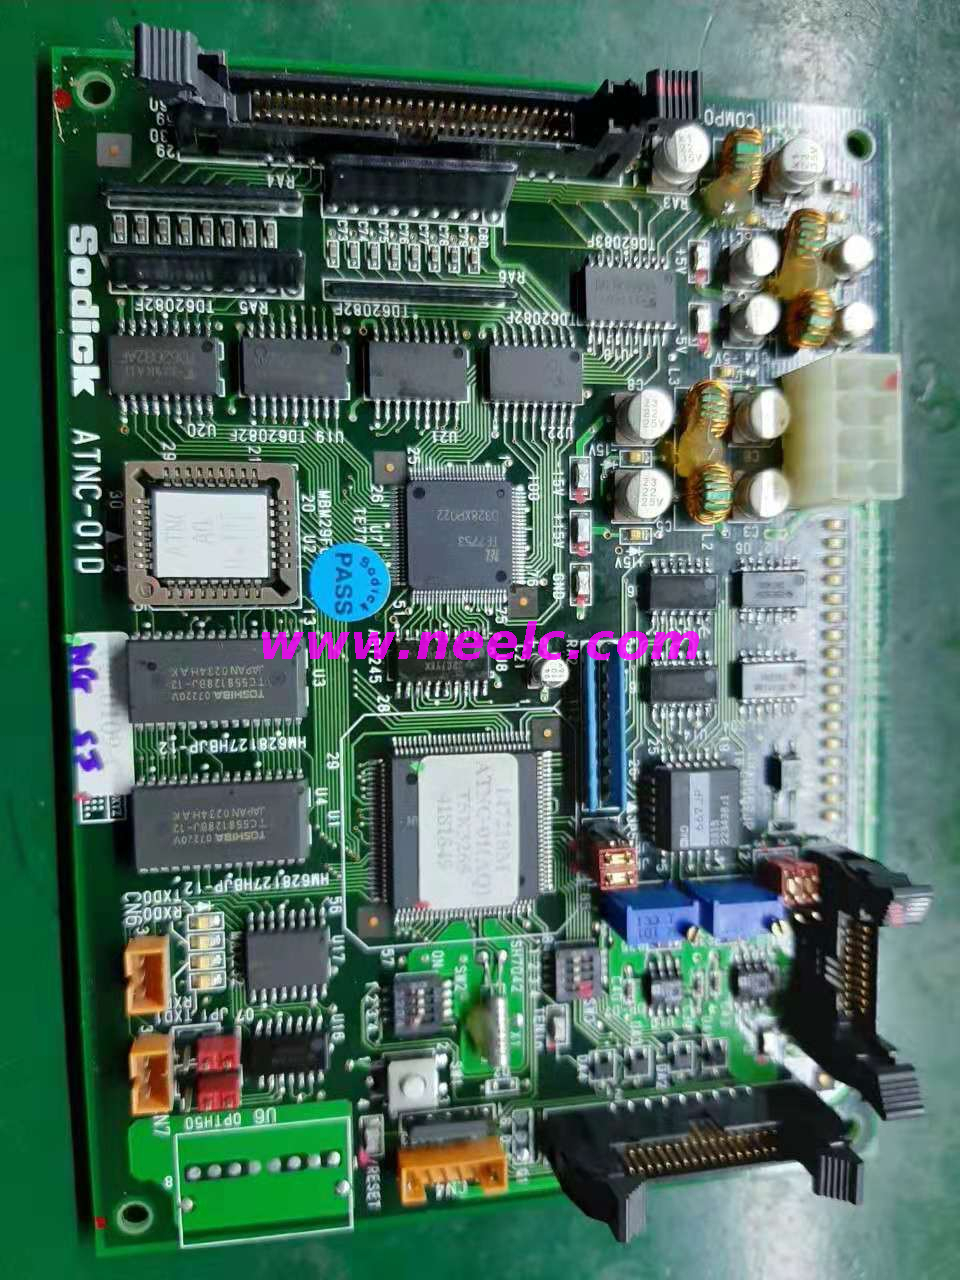 ATNC-01D circuit board, used in good condition